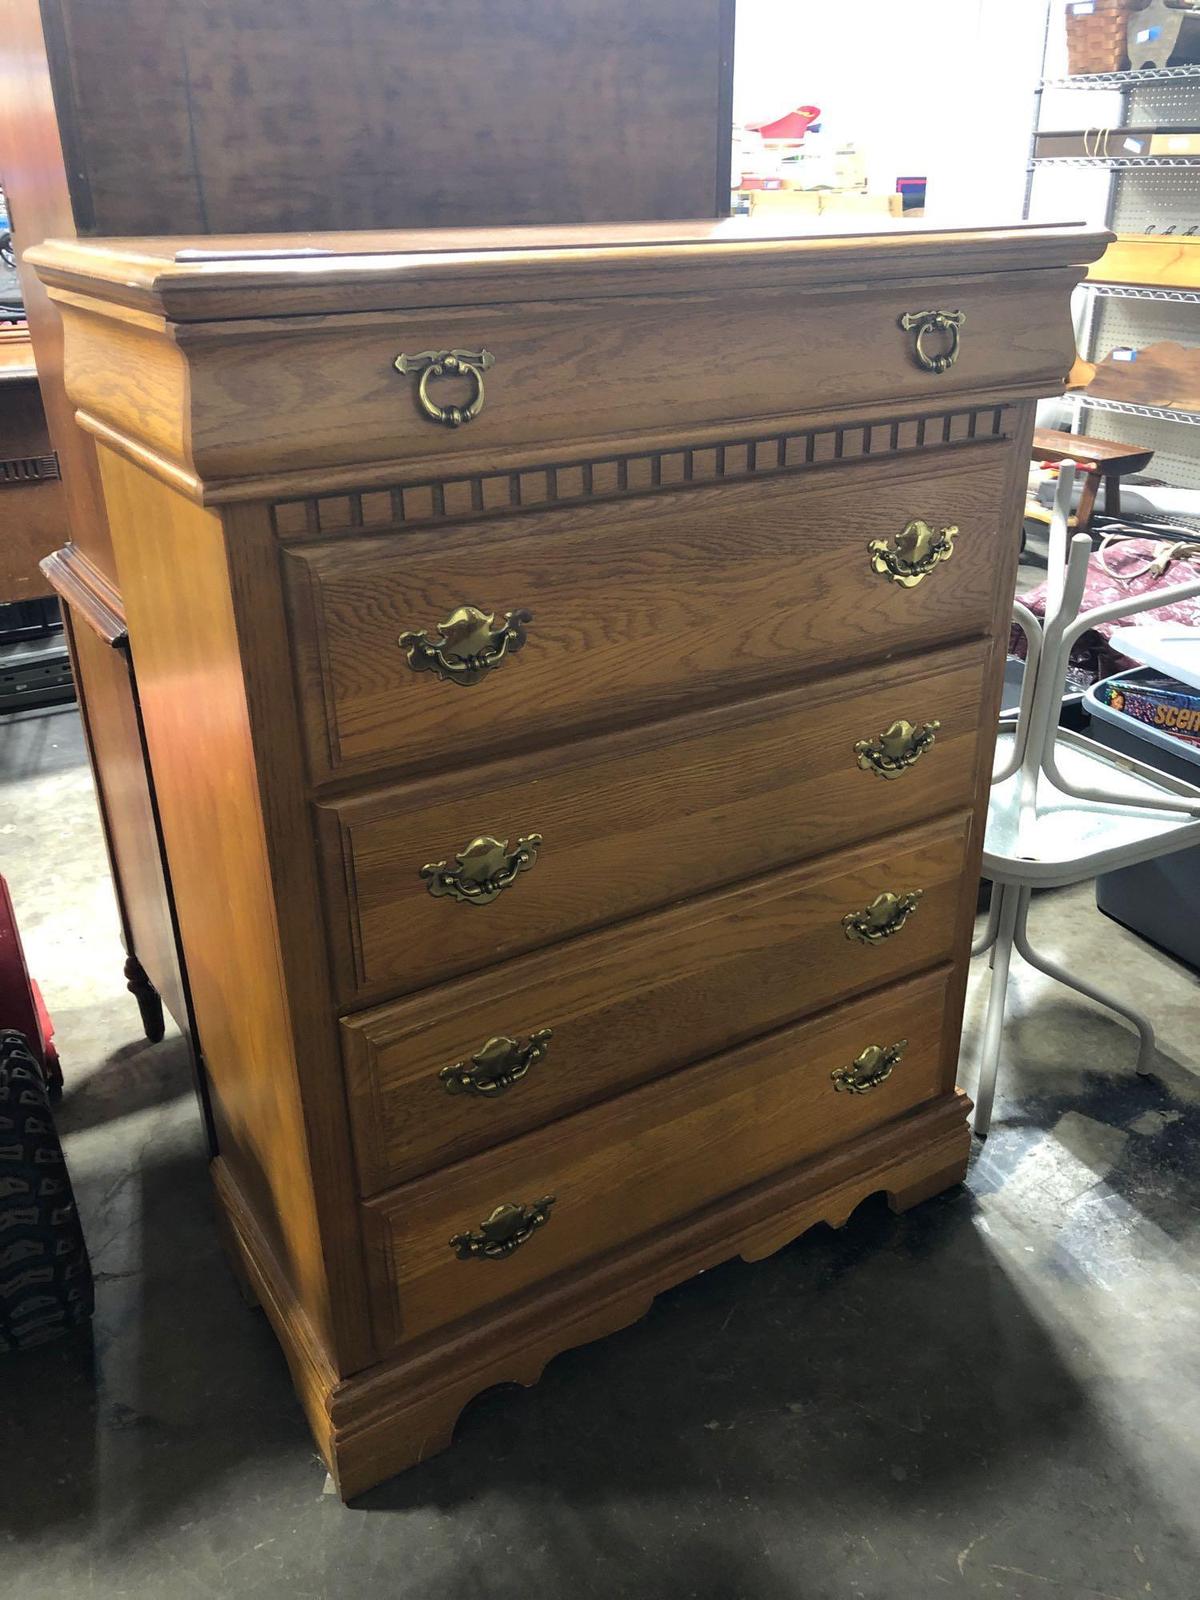 Five drawer oak dresser 36 inches wide 18 inches deep 48 inches tall